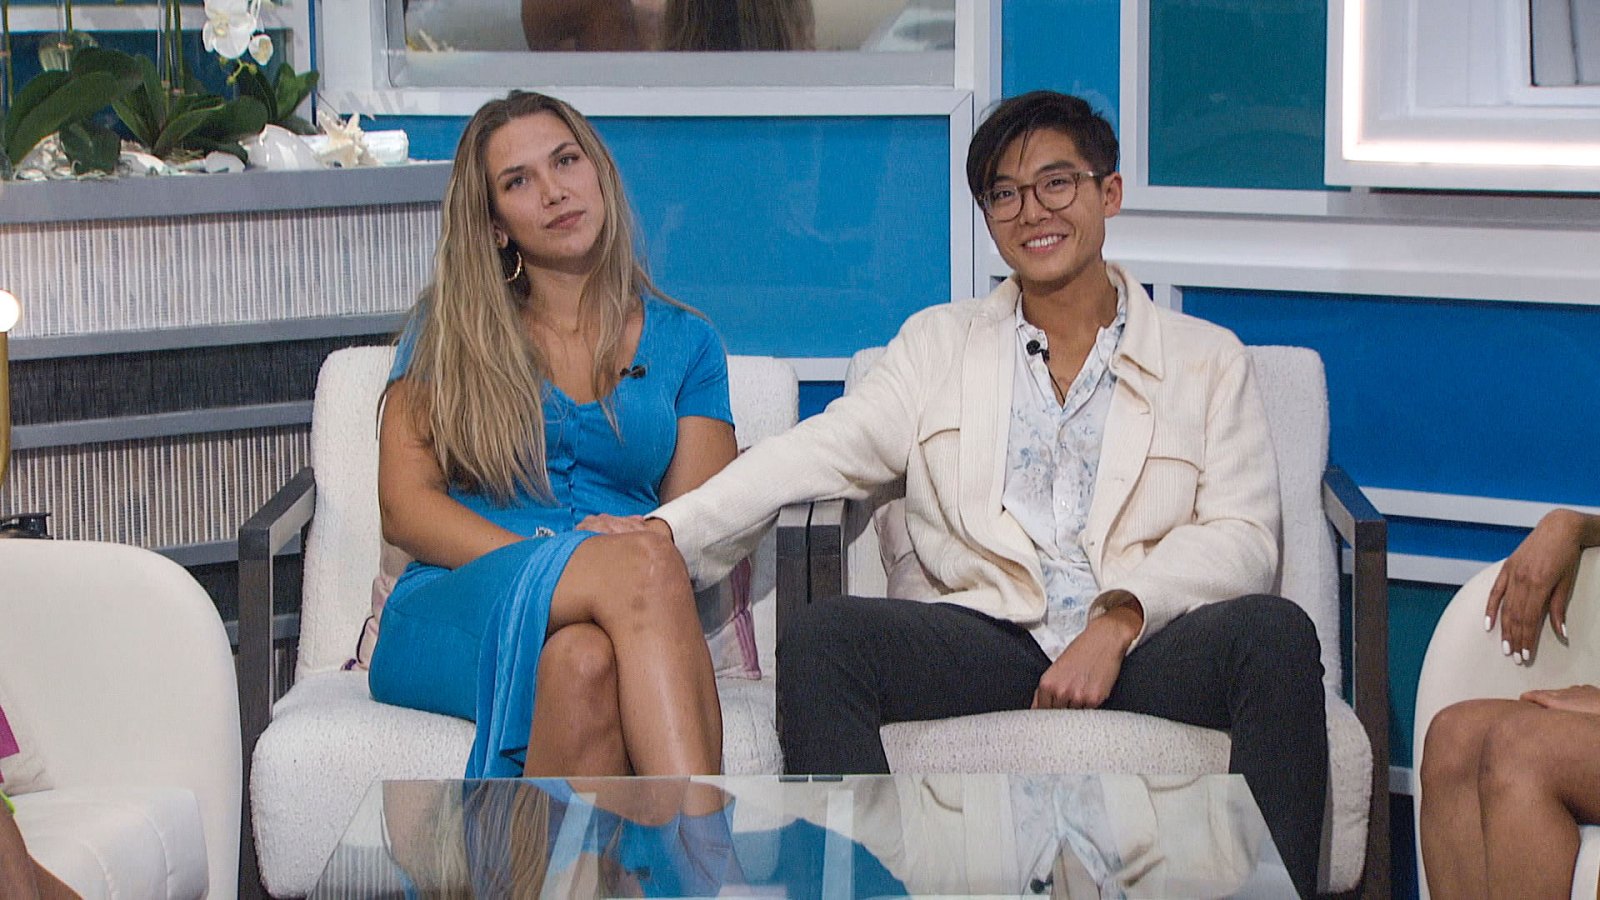 Big Brother’s Derek Xiao and Claire Rehfuss’ Relationship Timeline: From Housemates to Instagram Official and More